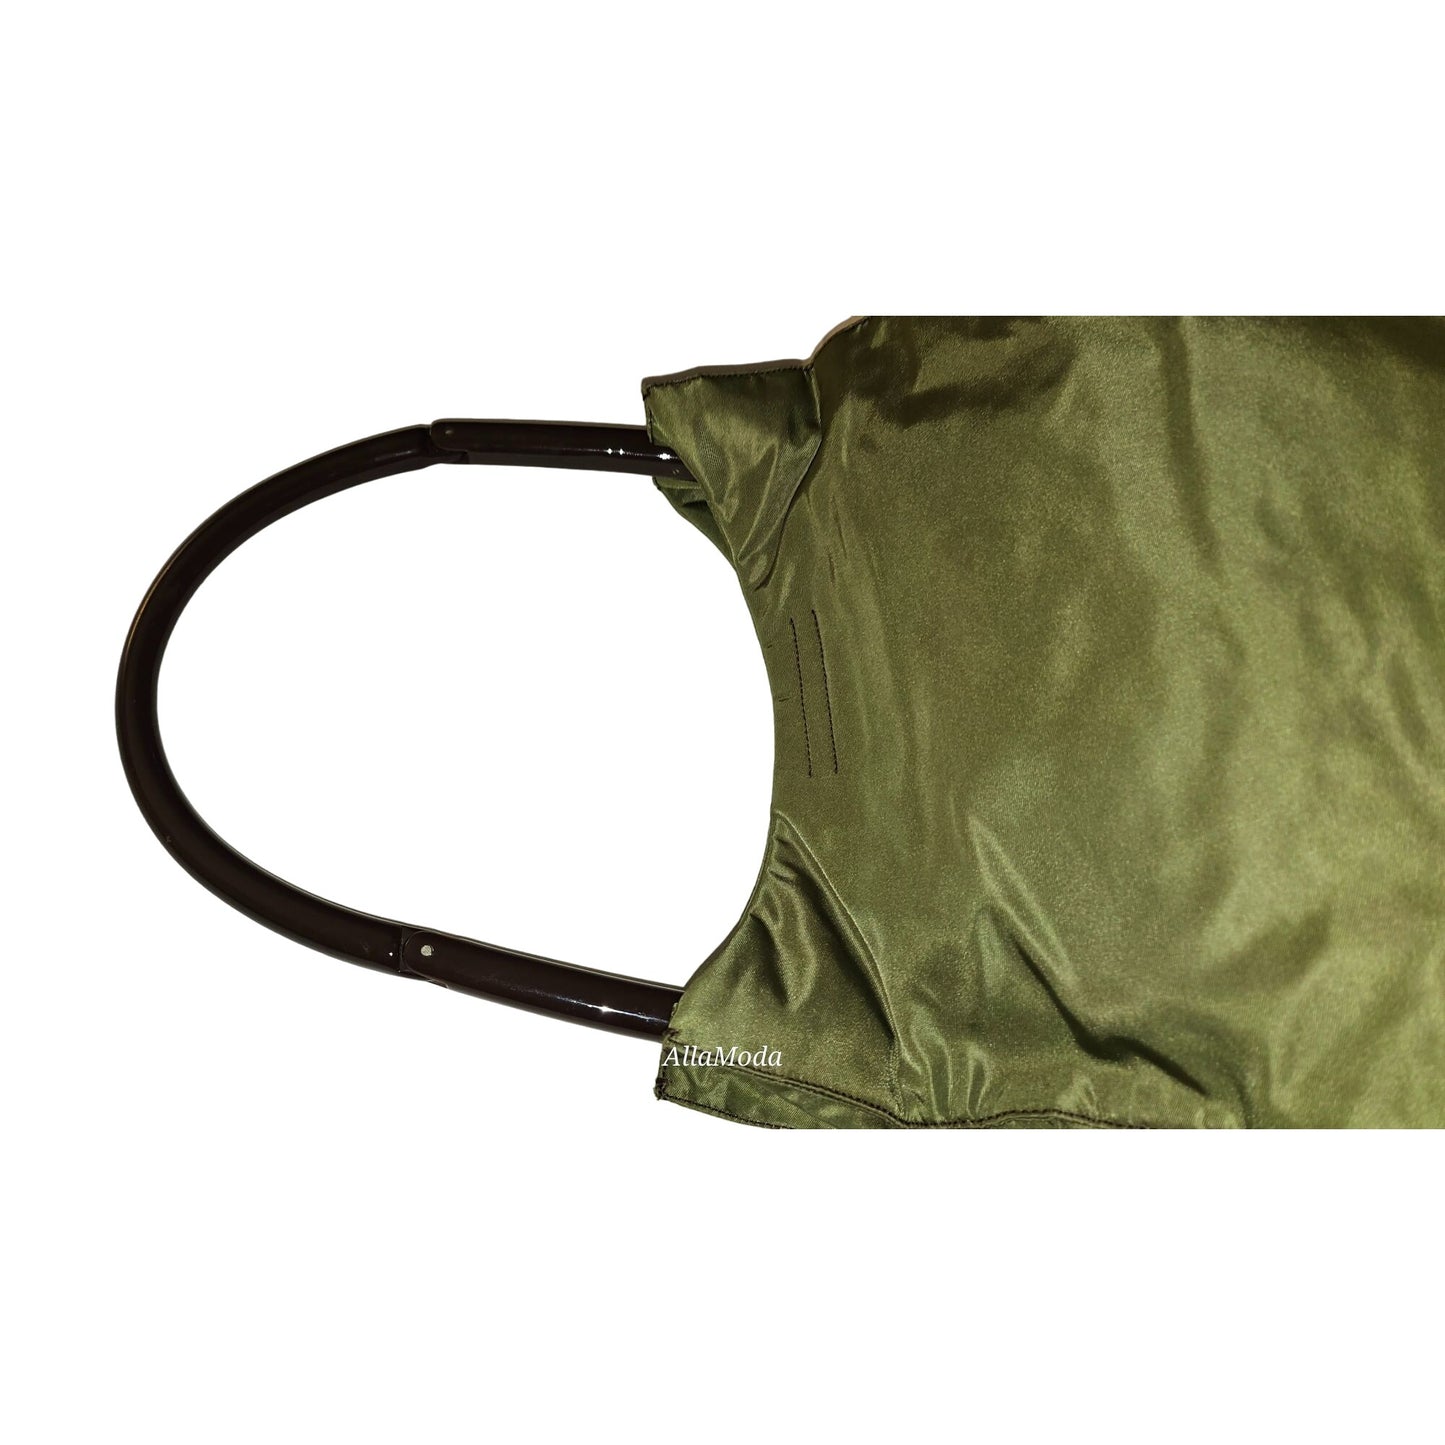 Prada olive nylon 1990's re-edition hobo with a Lucite strap